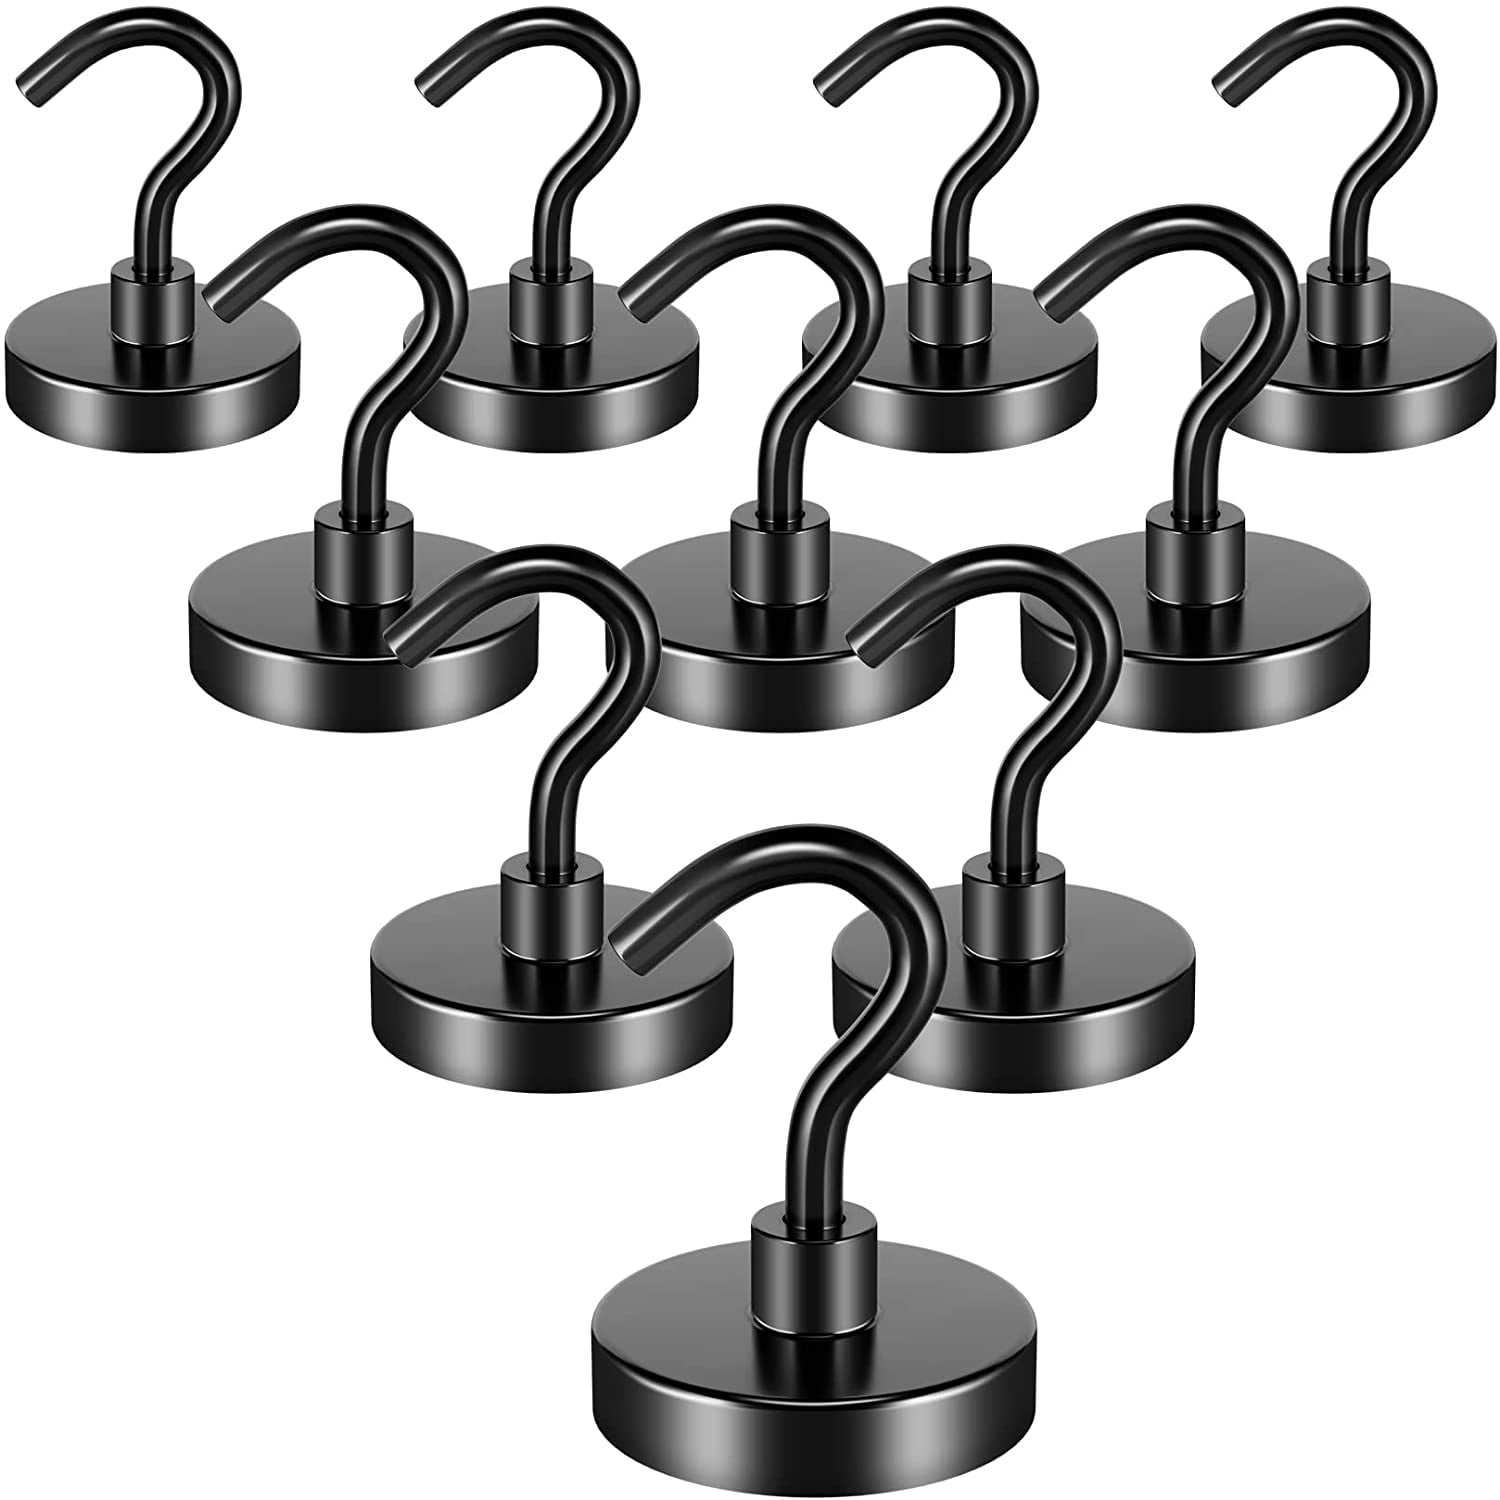 extra strong Black Neodymium Magnetic HOOKS Magnetic Hook housing and industry 